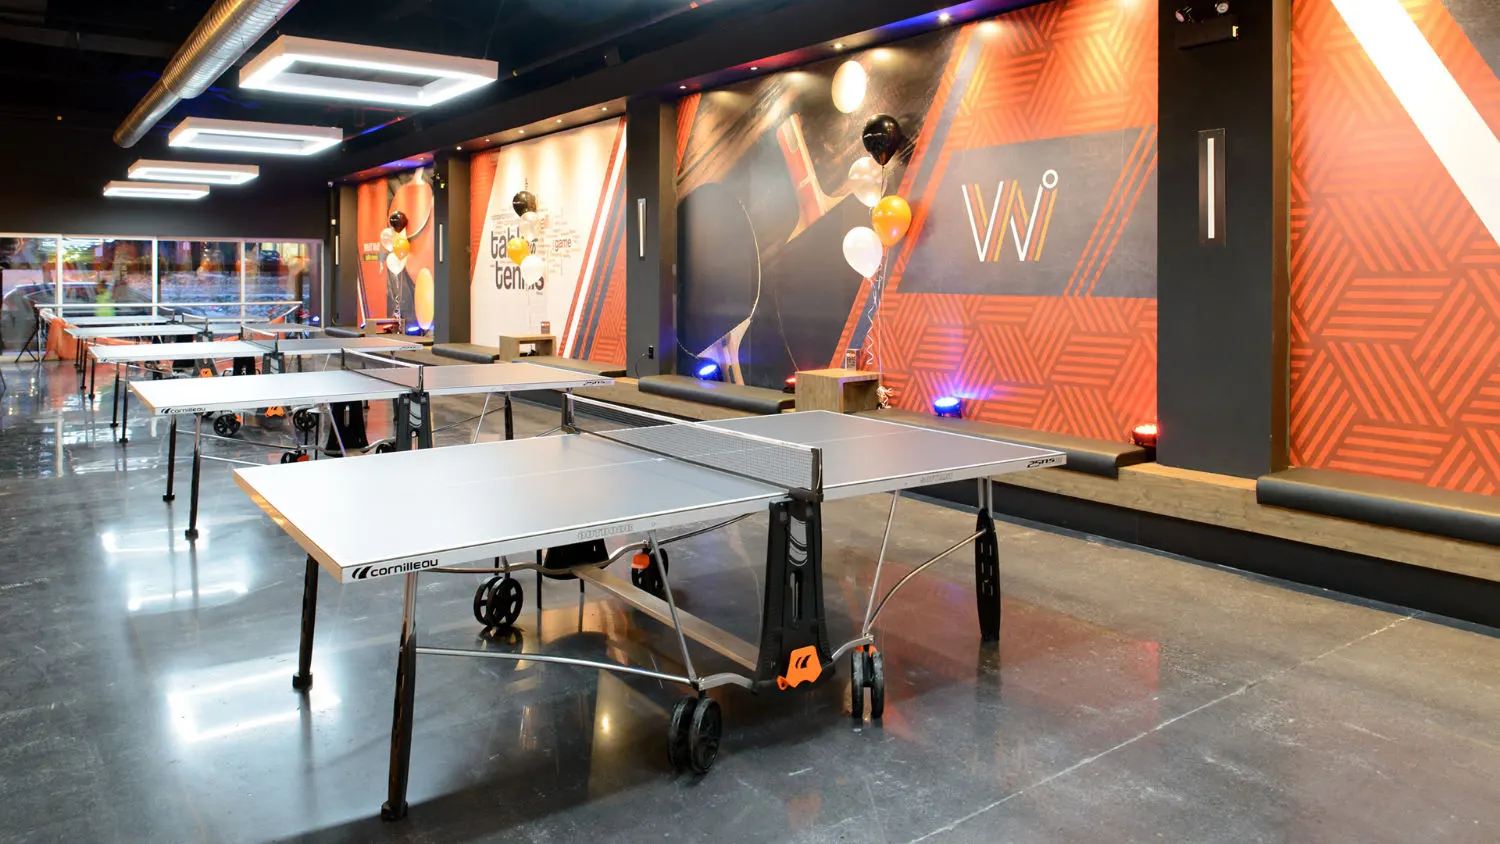 Interior design project for Whiff Waff Bar & Lounge. Designed the bar with the maximized number of ping pong tables while having a full bar and available seating for on-lookers